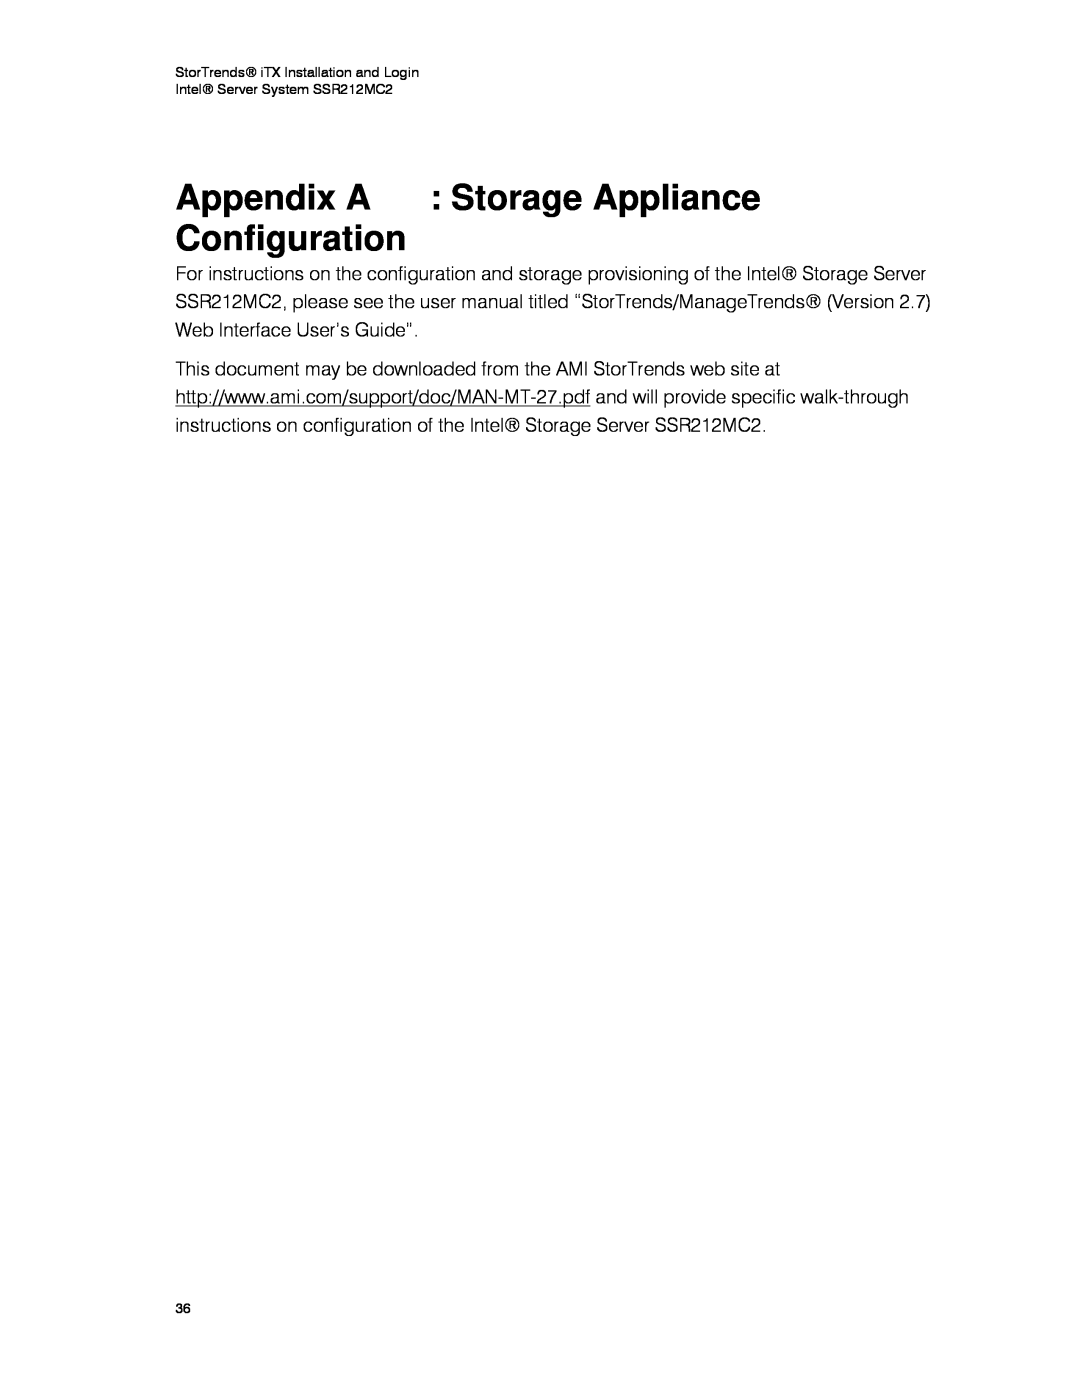 Intel SSR212MC2 manual Appendix A Storage Appliance Configuration, StorTrends iTX Installation and Login 